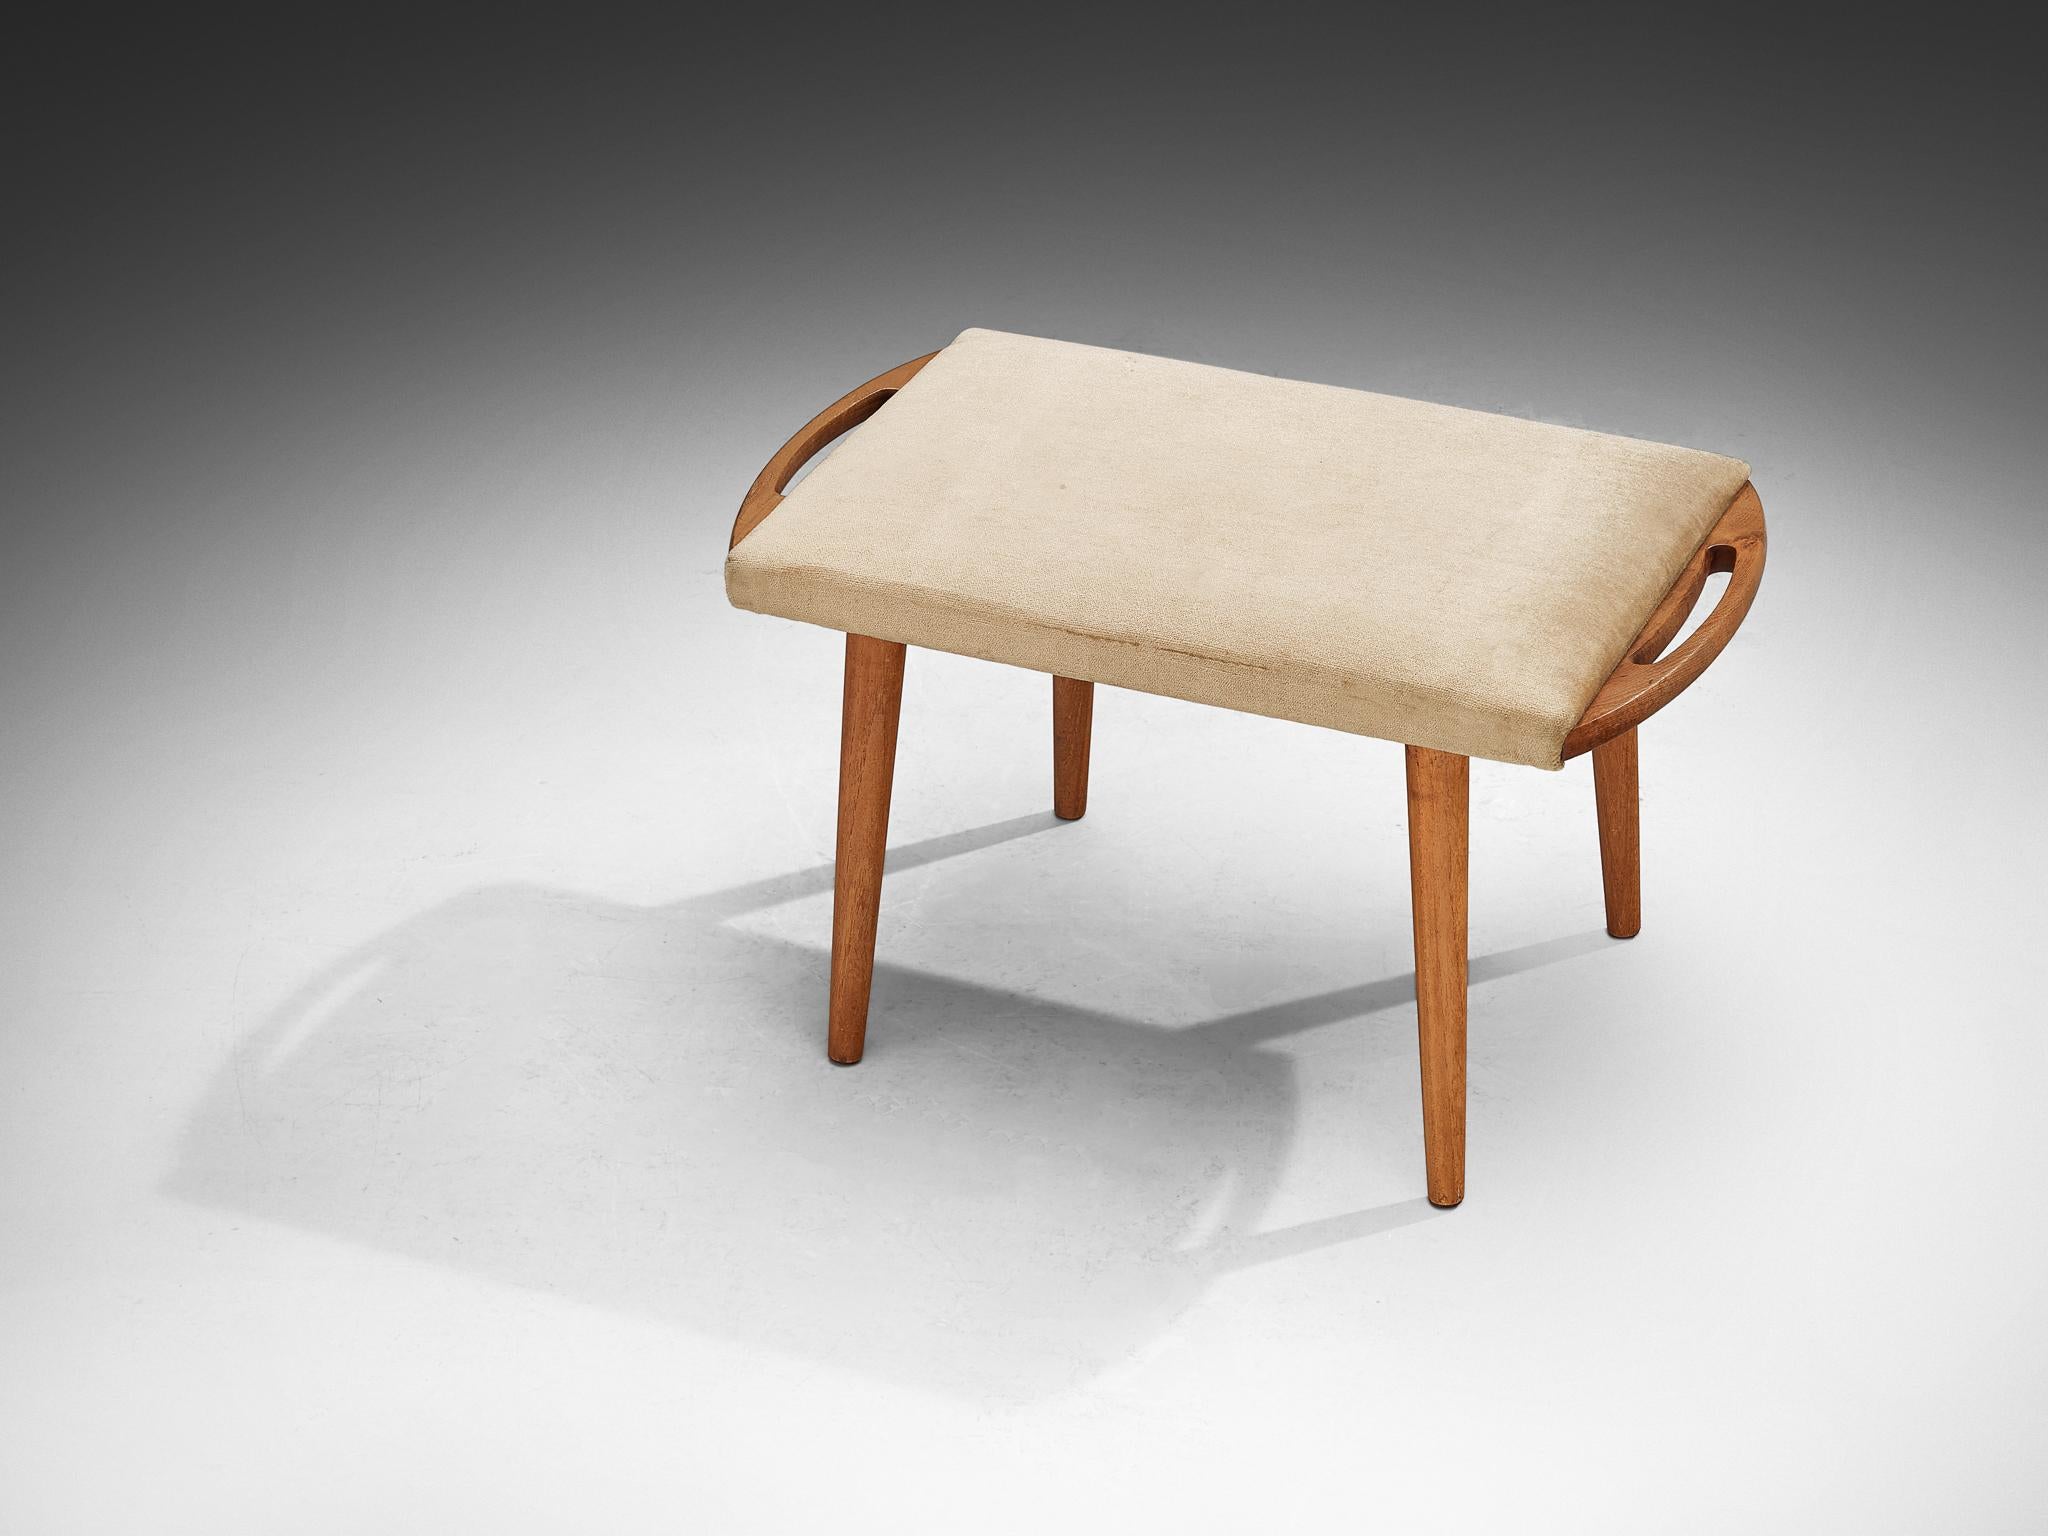 Ottoman, teak, wood, fabric, Europe, 1950s

Simple in its design, this stool features an open framework in teak with tapered legs. Its unassuming design allows it to blend seamlessly with various decorative styles, which is a characteristic that